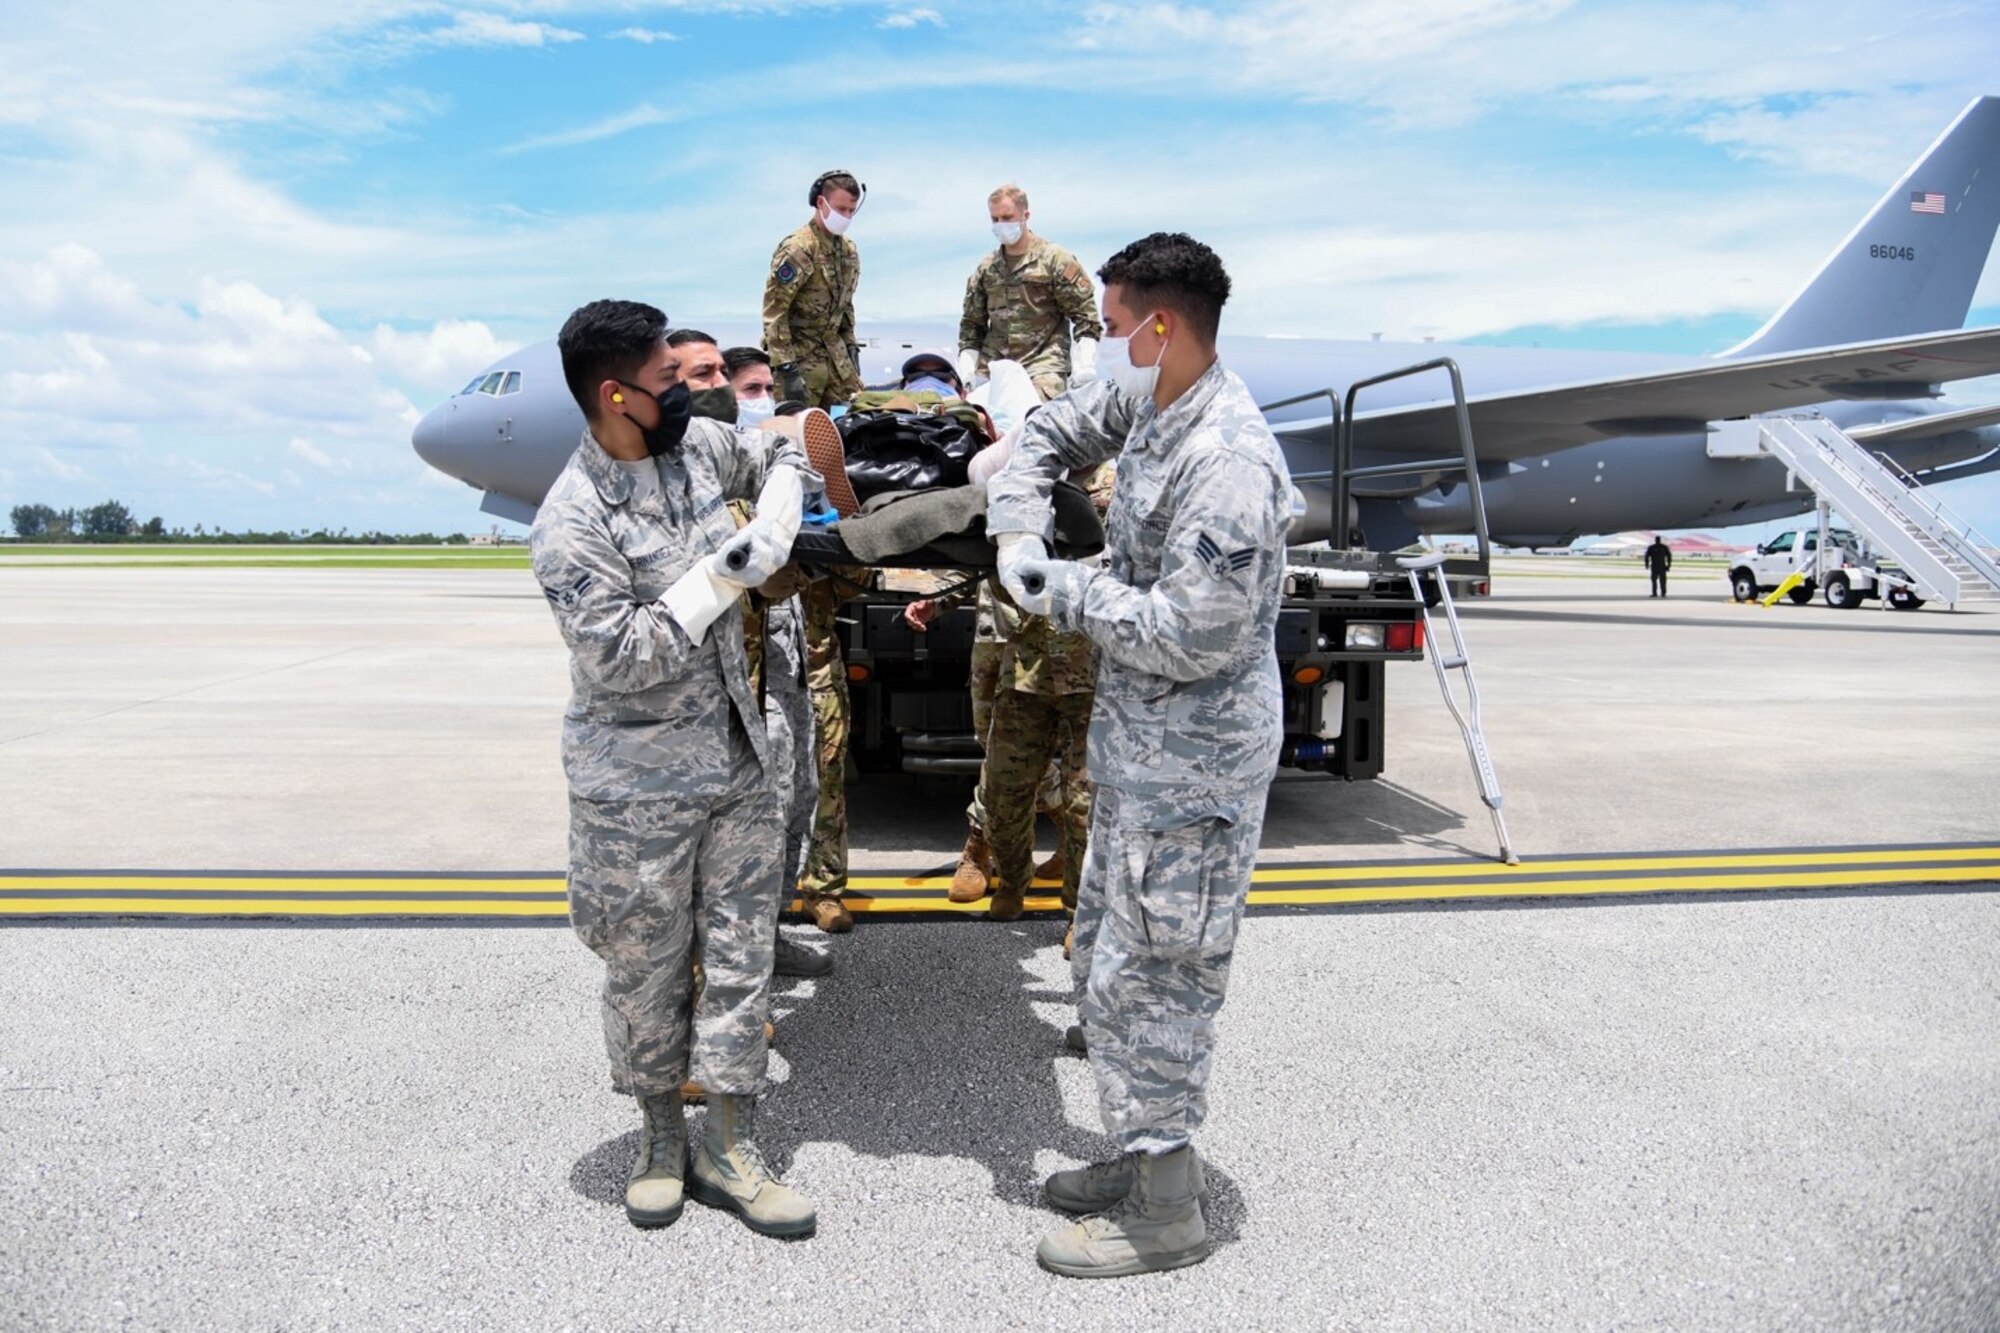 Airmen from the 45th Operational Medical Readiness Squadron, offload a patient July 10, 2020, at Patrick Air Force Base, Florida. The patients had recently returned from overseas to their home stations for follow-on care. (U.S. Air Force photo Airmen 1st Class Nilsa Garcia)